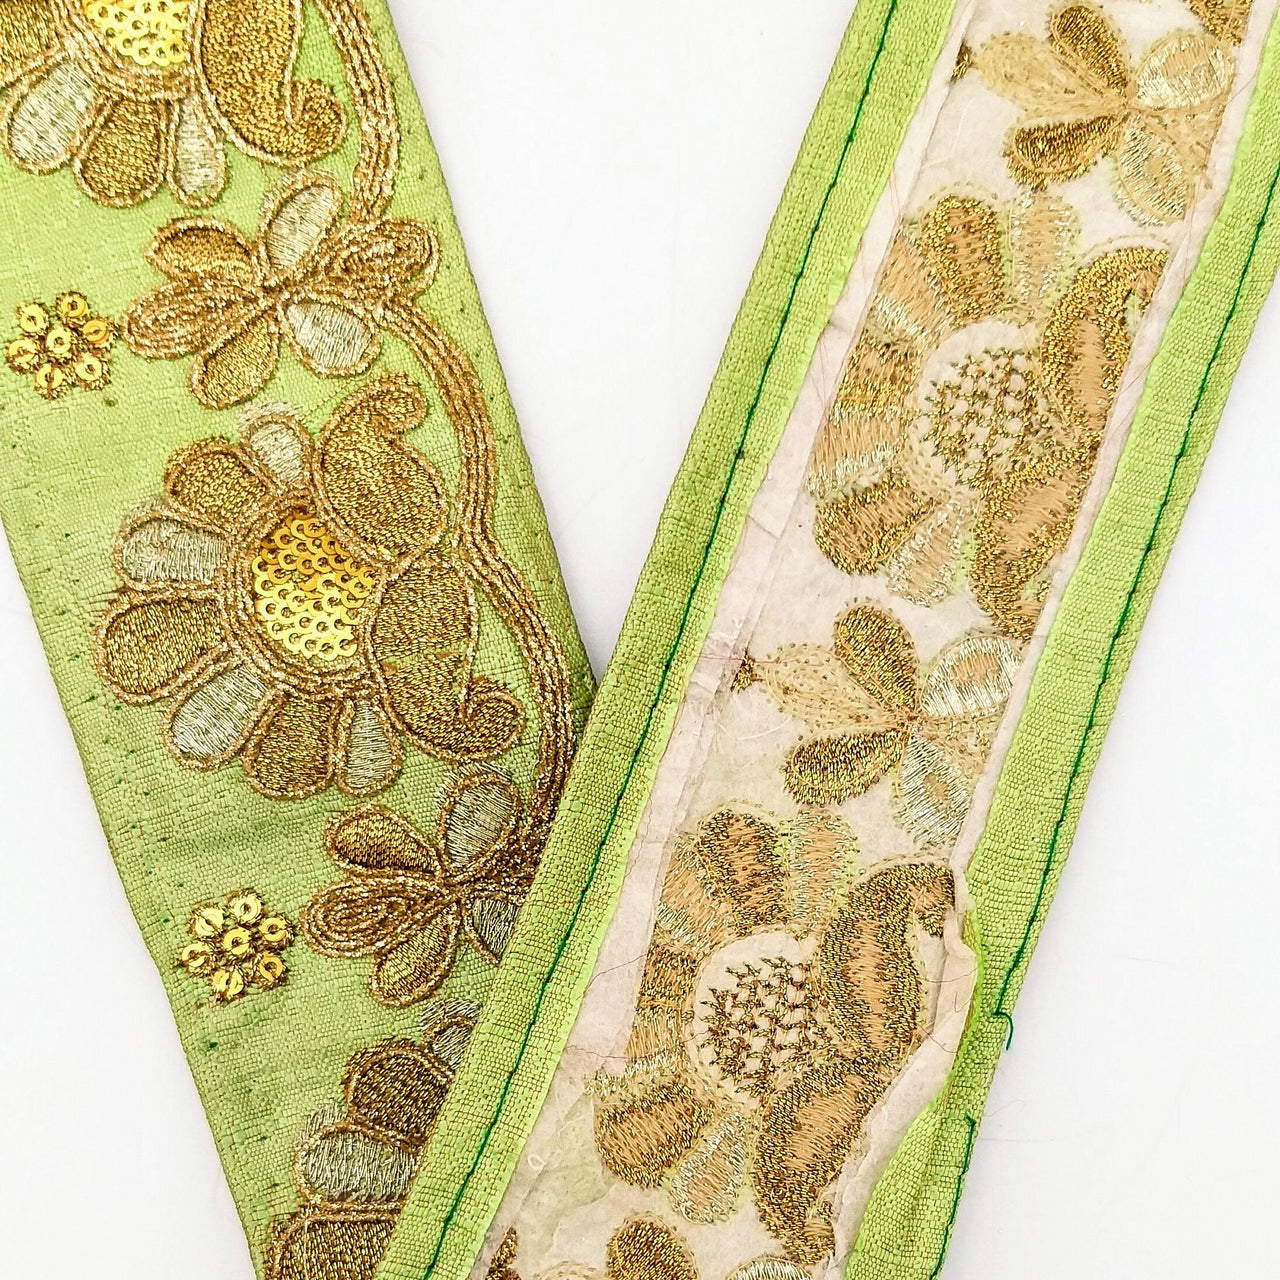 Green Art Silk Trim In Gold Floral Embroidery, Gold Embroidered Flowers Border, Floral Trim